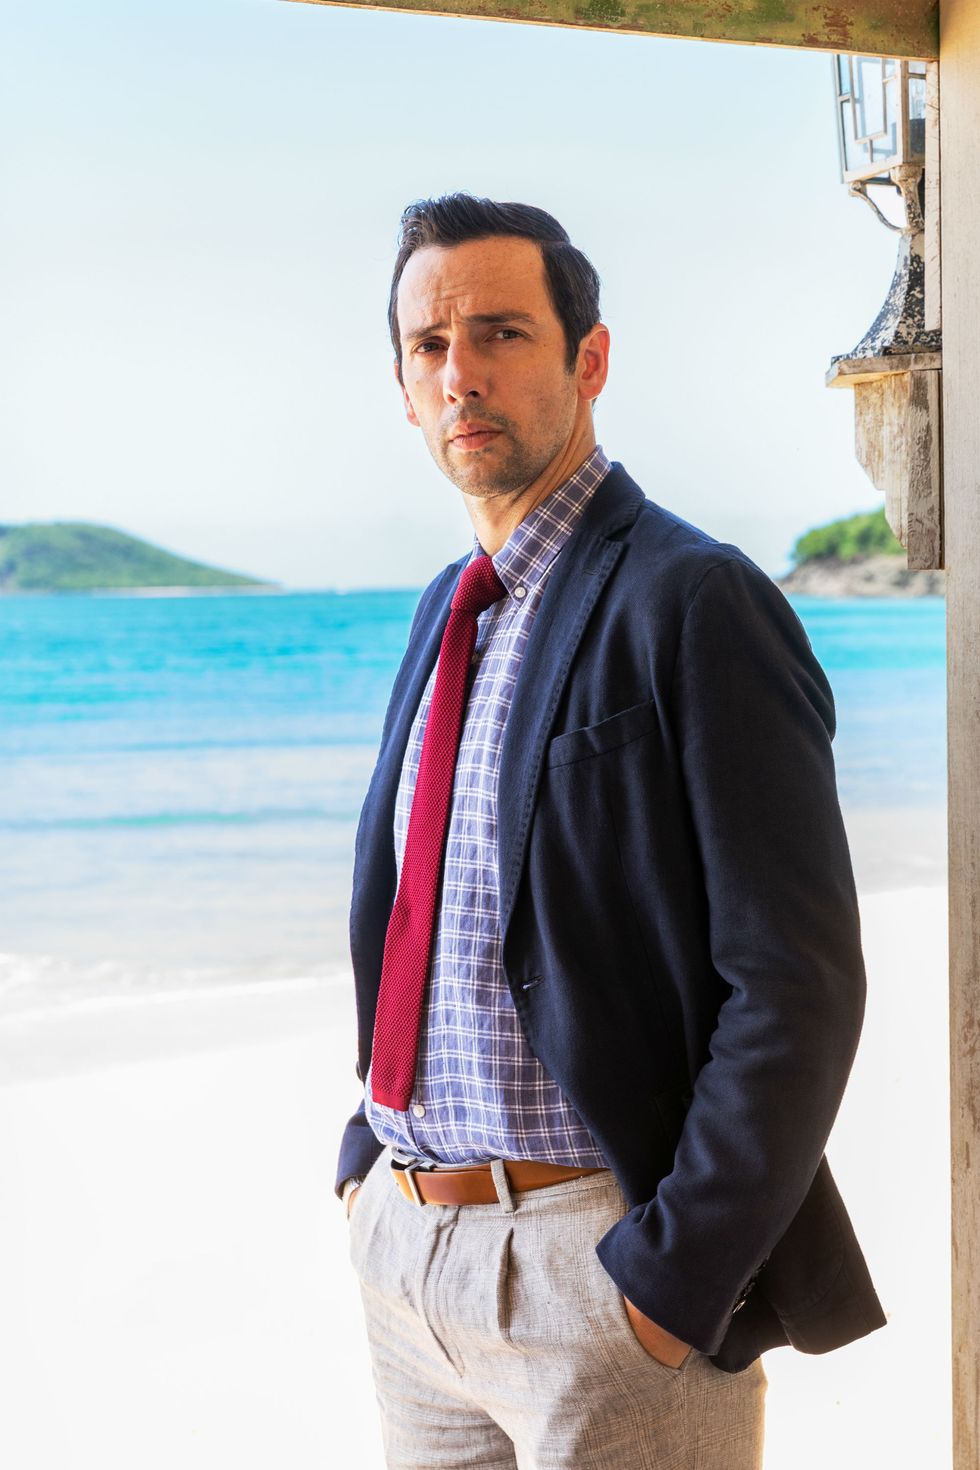 ralf little as detective inspector neville parker in death in paradise